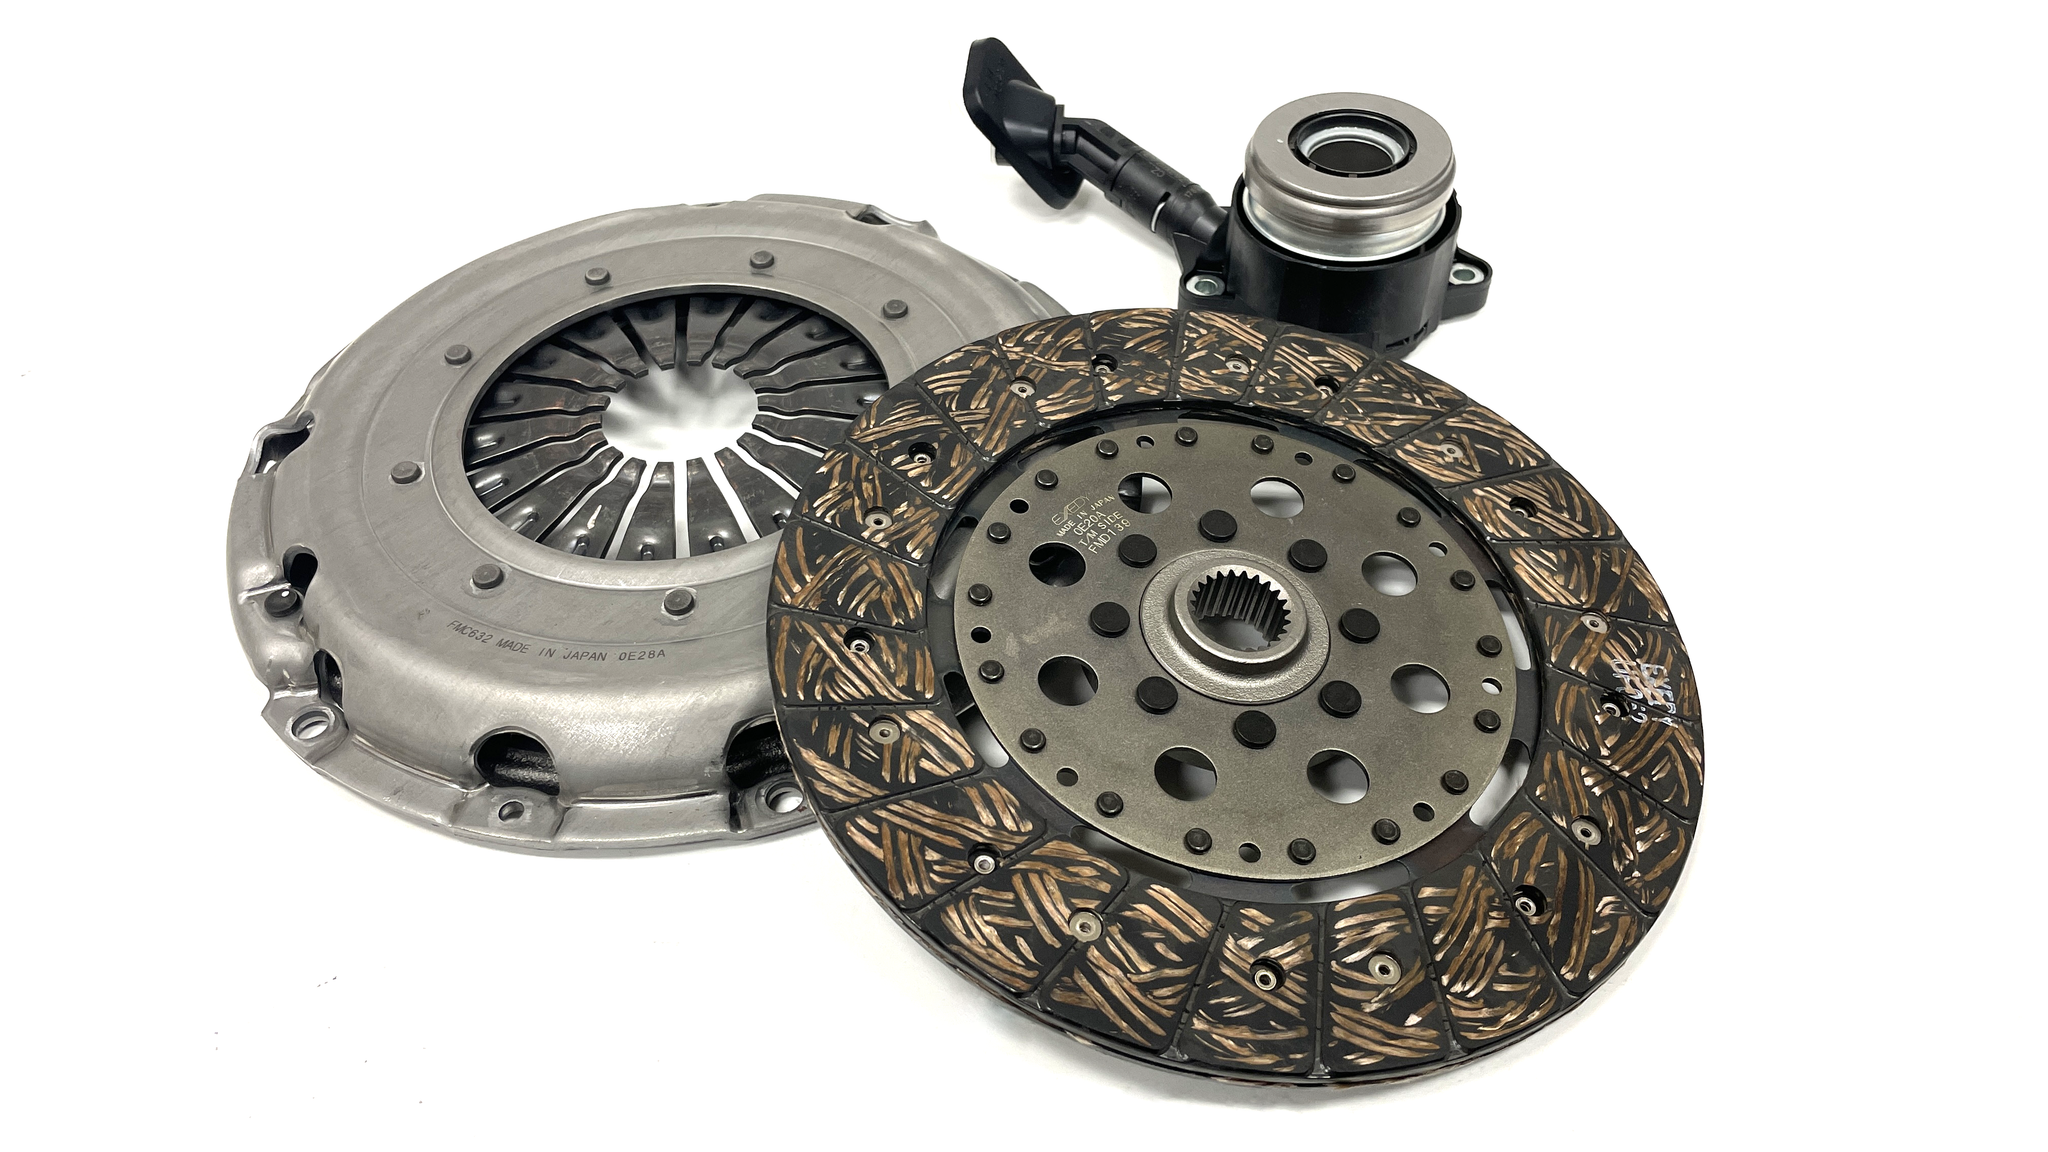 Exedy SMF Conversion Clutch Kit Include CSC for Ford Focus LS LS LT LV